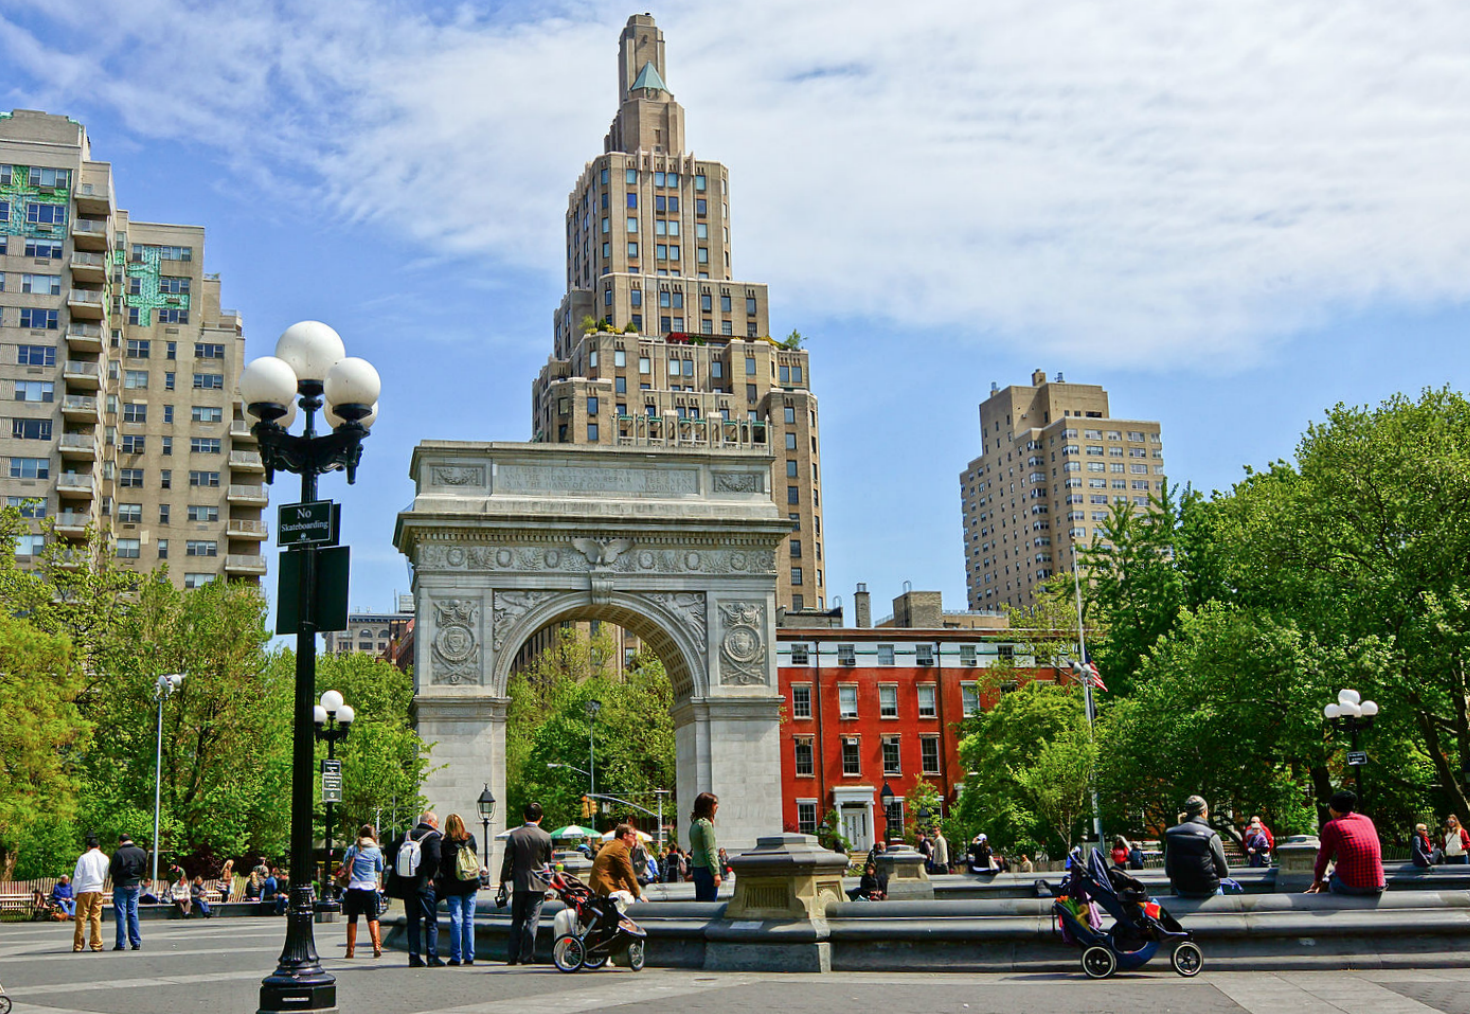 The Washington Square Arch and fountain on a sunny day.